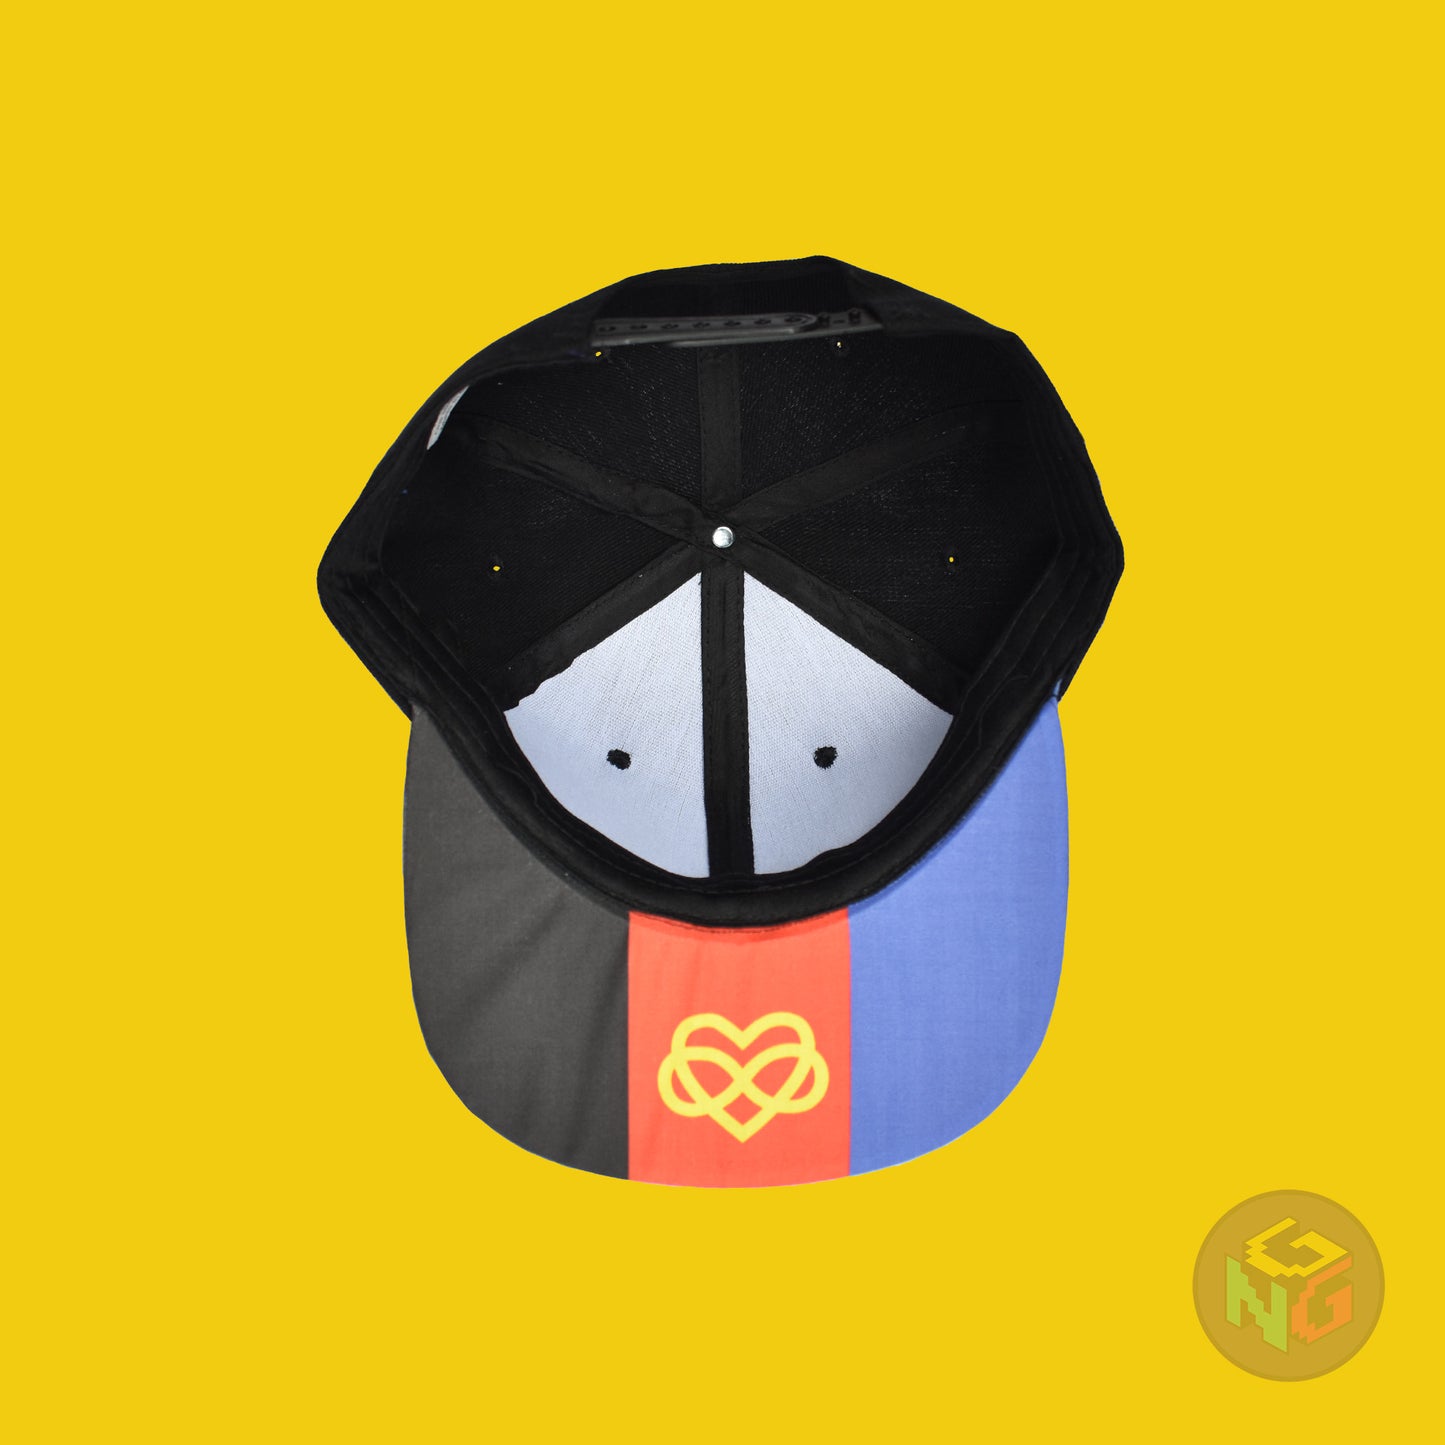 Black flat bill snapback hat. The brim has the polyamory pride flag with the heart infinity symbol on both sides and the front of the hat has the word “POLYAM” in red, yellow, and blue letters. Underside view